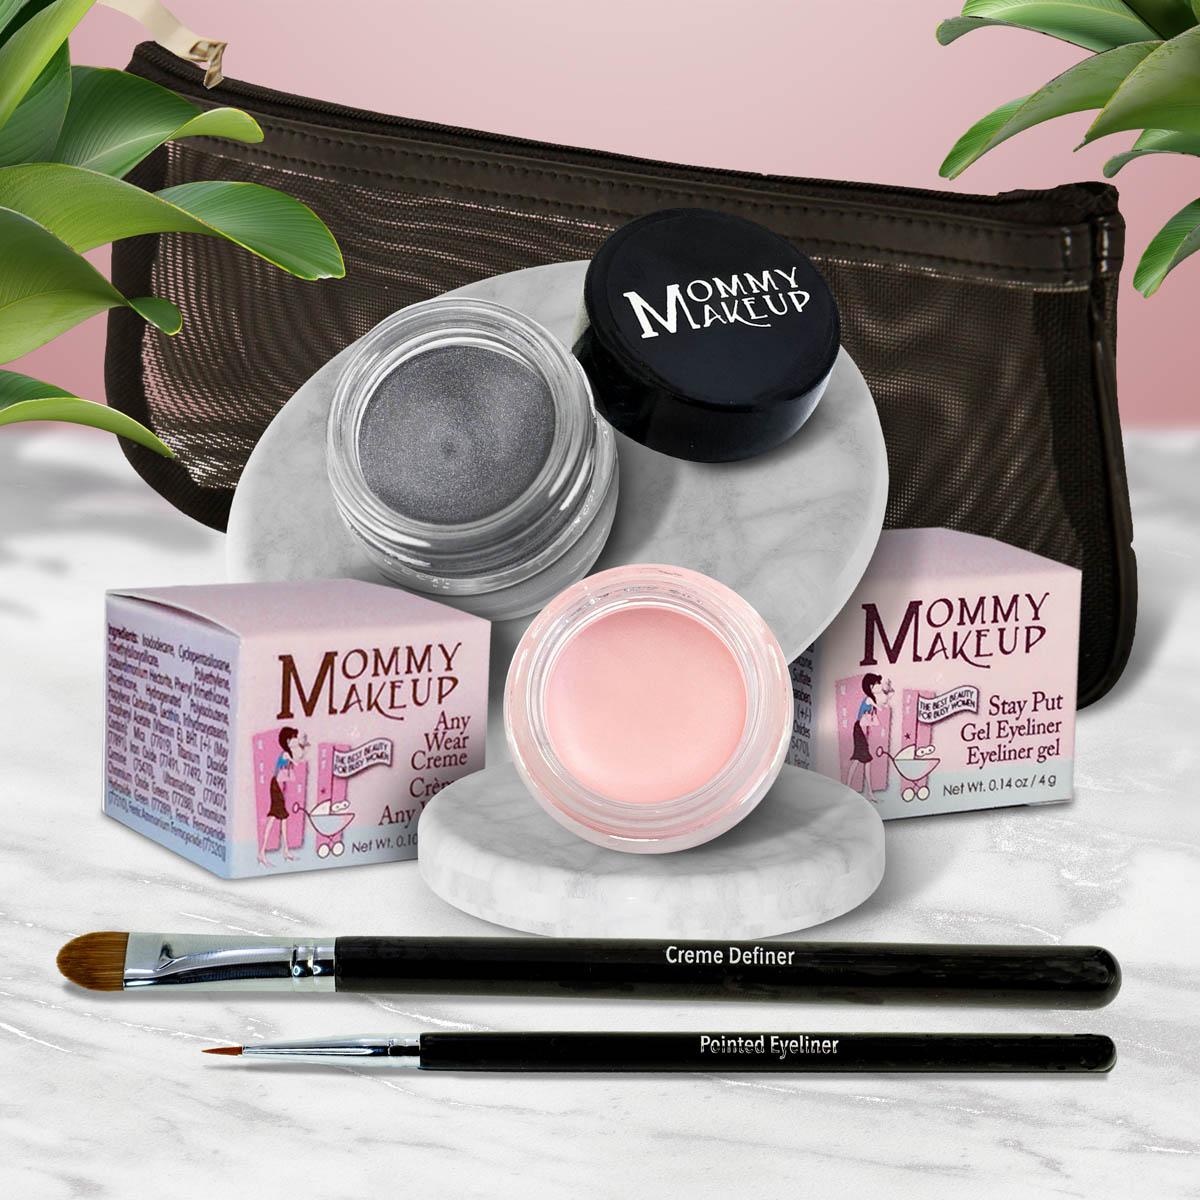 5 piece waterproof eye makeup set. Eyeliner, Eye shadow, brushes. Allergy tested, cruelty free. Made in USA. Cameo - a light nude pink and Steel Magnolia - Deep grey with shimmer